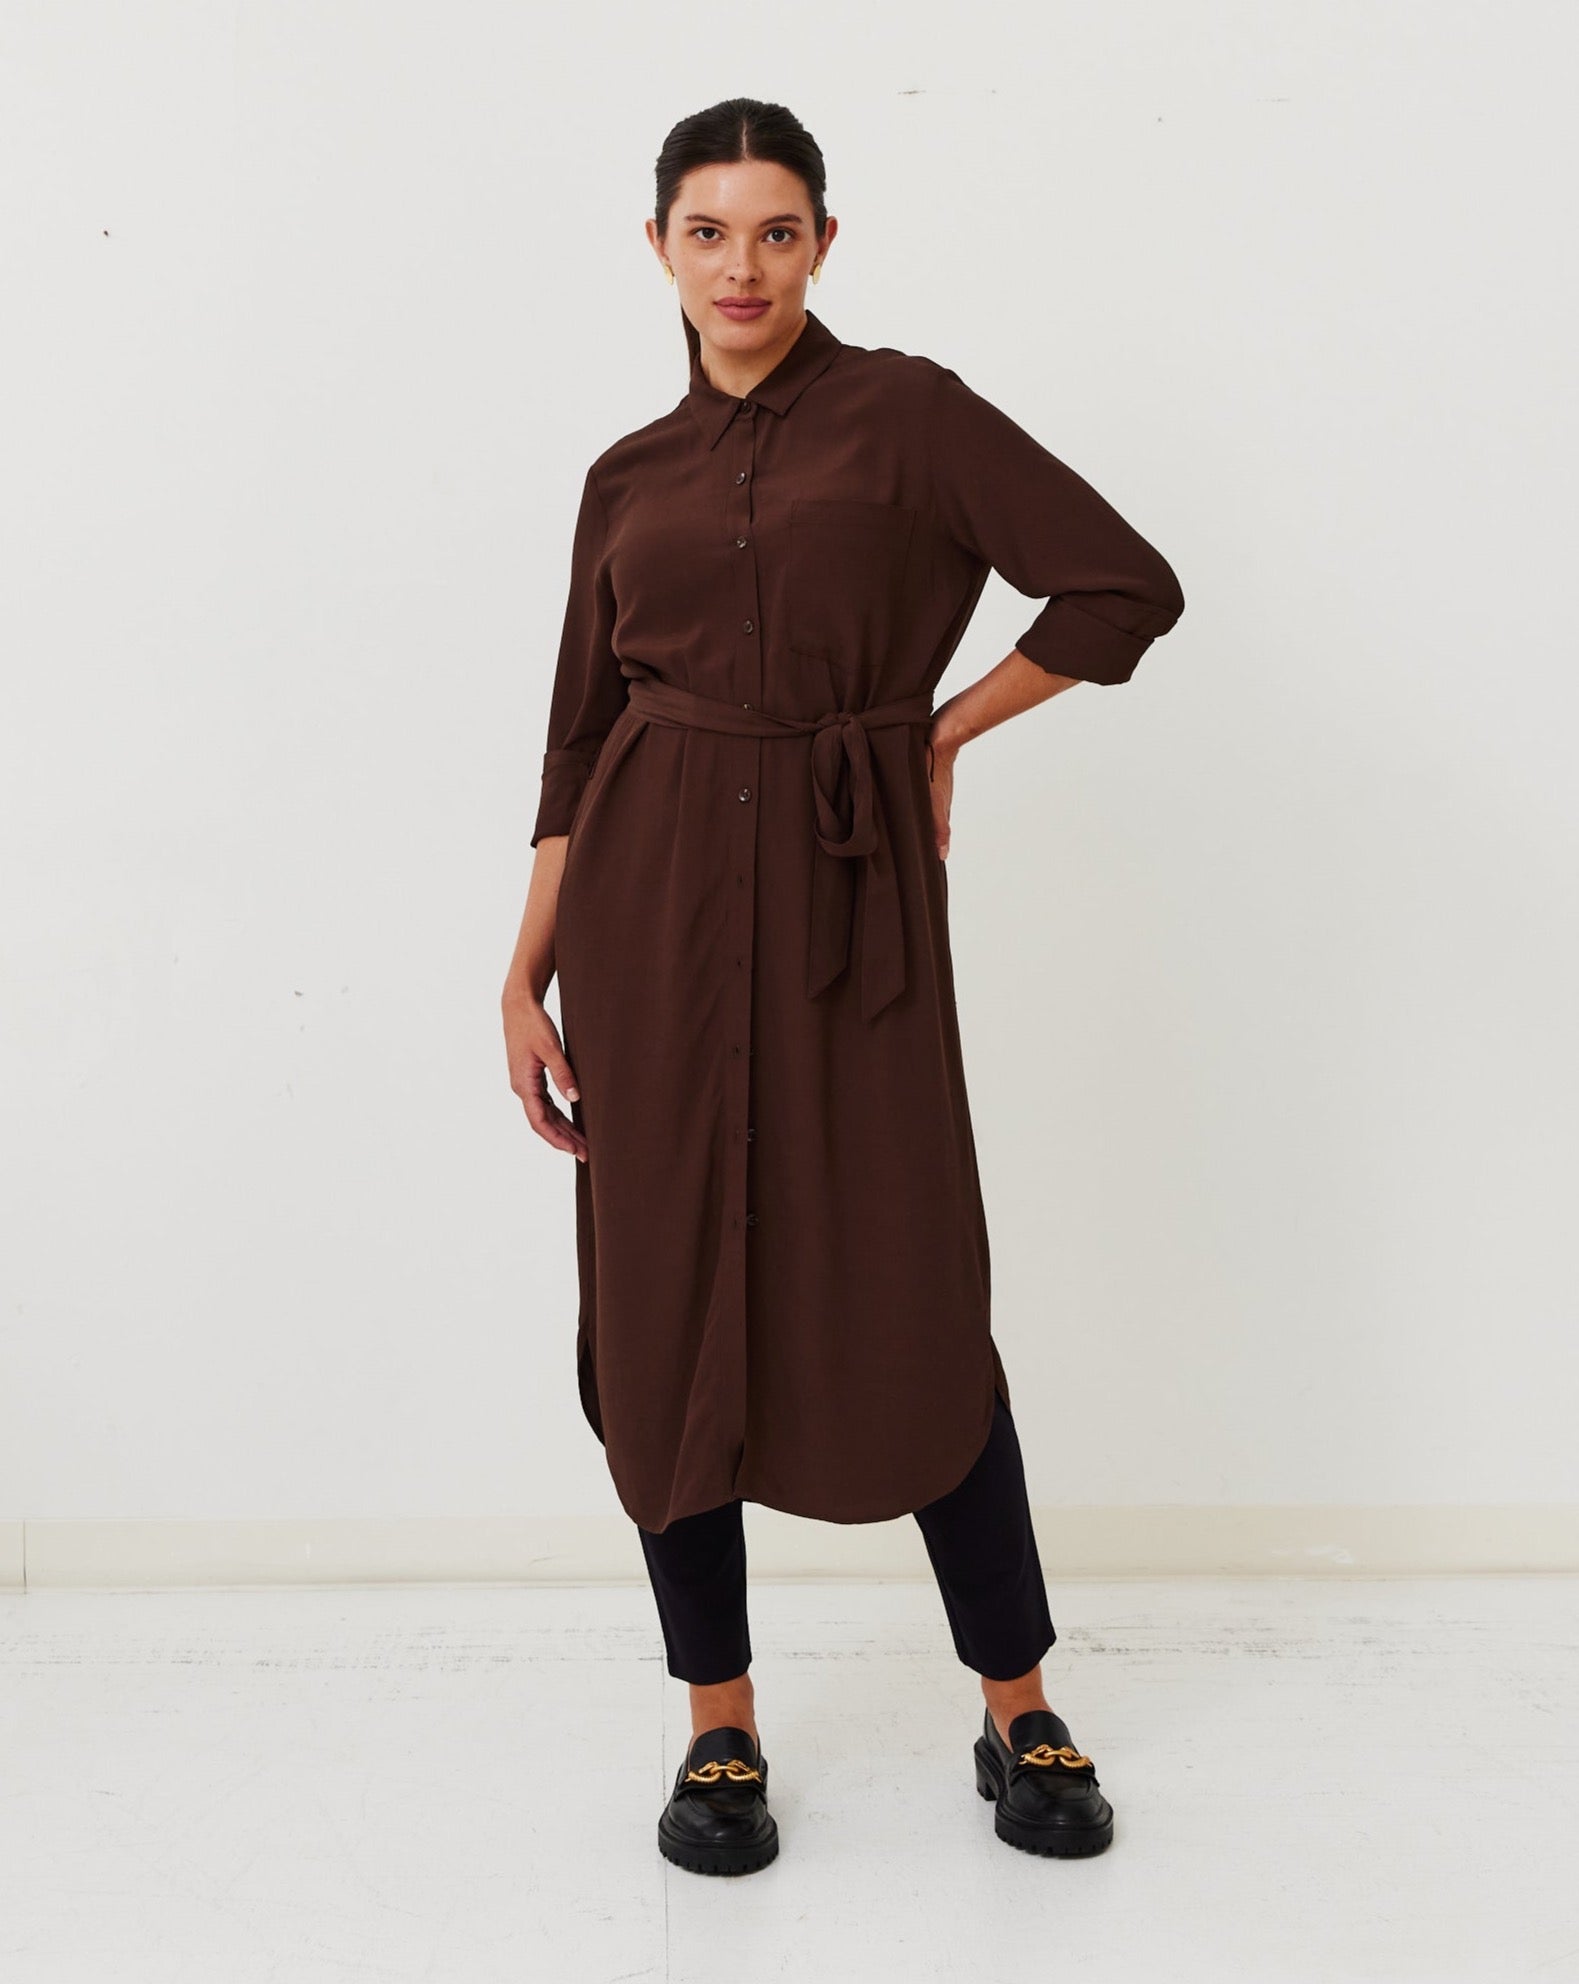 The Shirtdress Duster